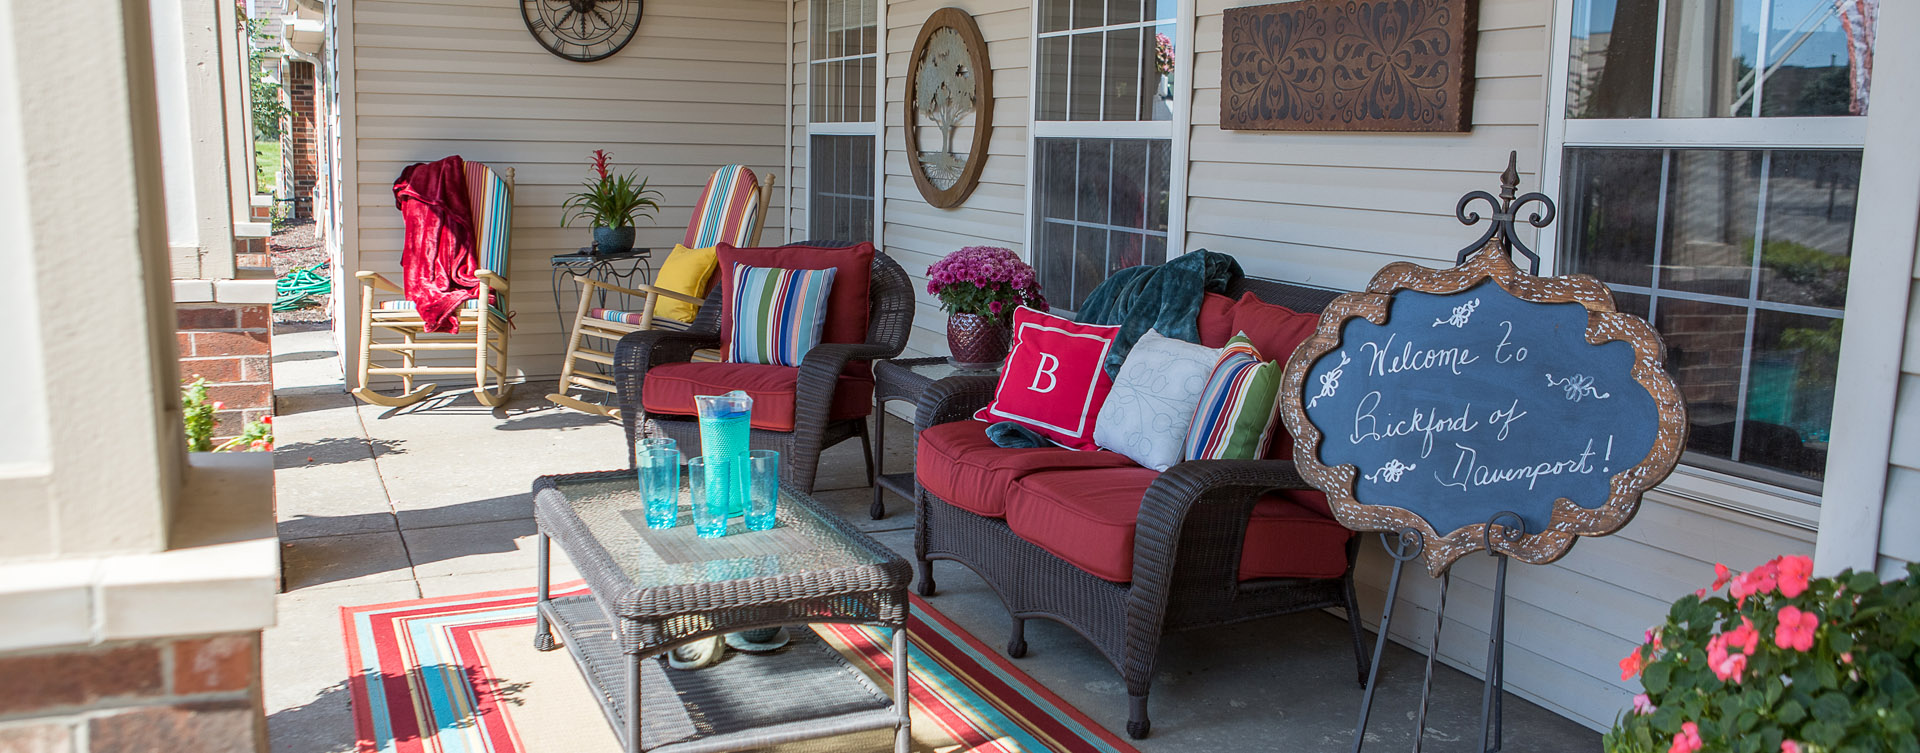 Sip on your favorite drink on the porch at Bickford of Davenport